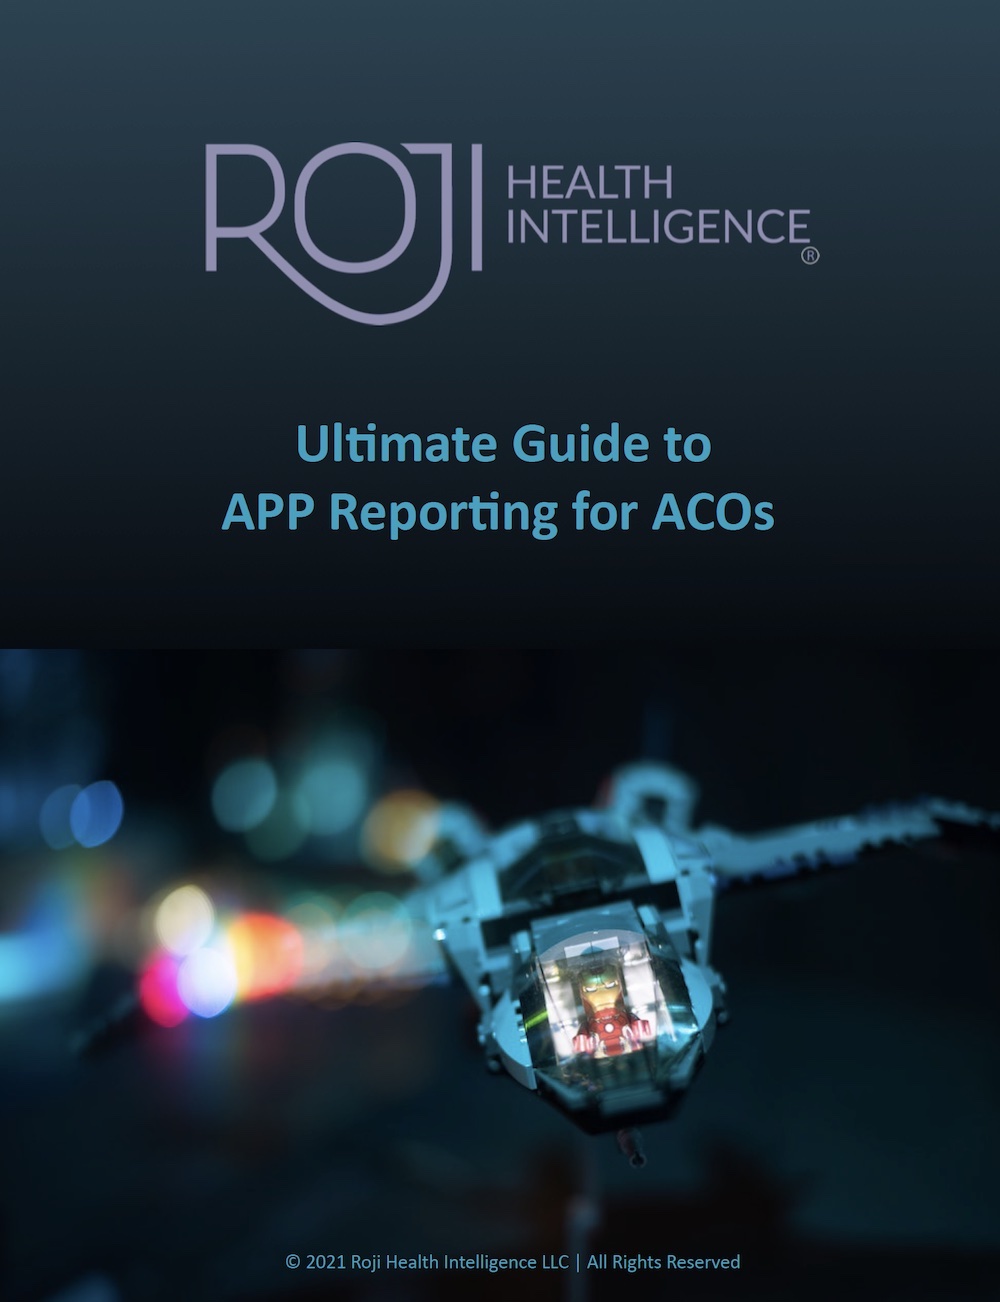 Prepare Your ACO for APP Reporting with Our Ultimate Guide